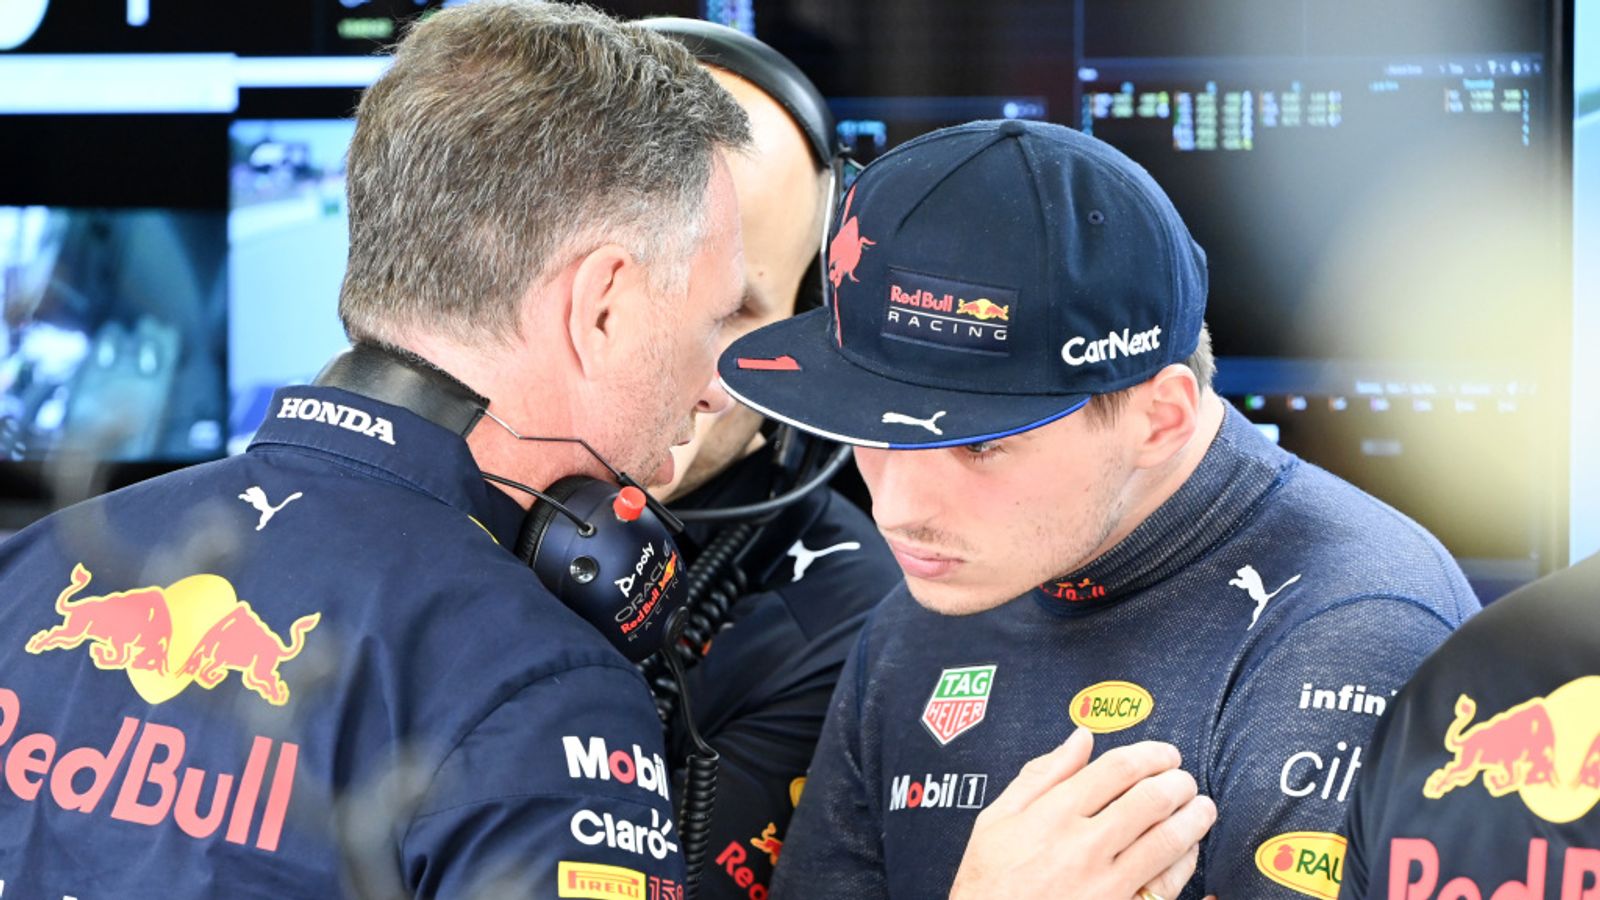 Red Bull team principal Christian Horner dismisses criticism from Max Verstappen’s father over Sergio Perez’s status